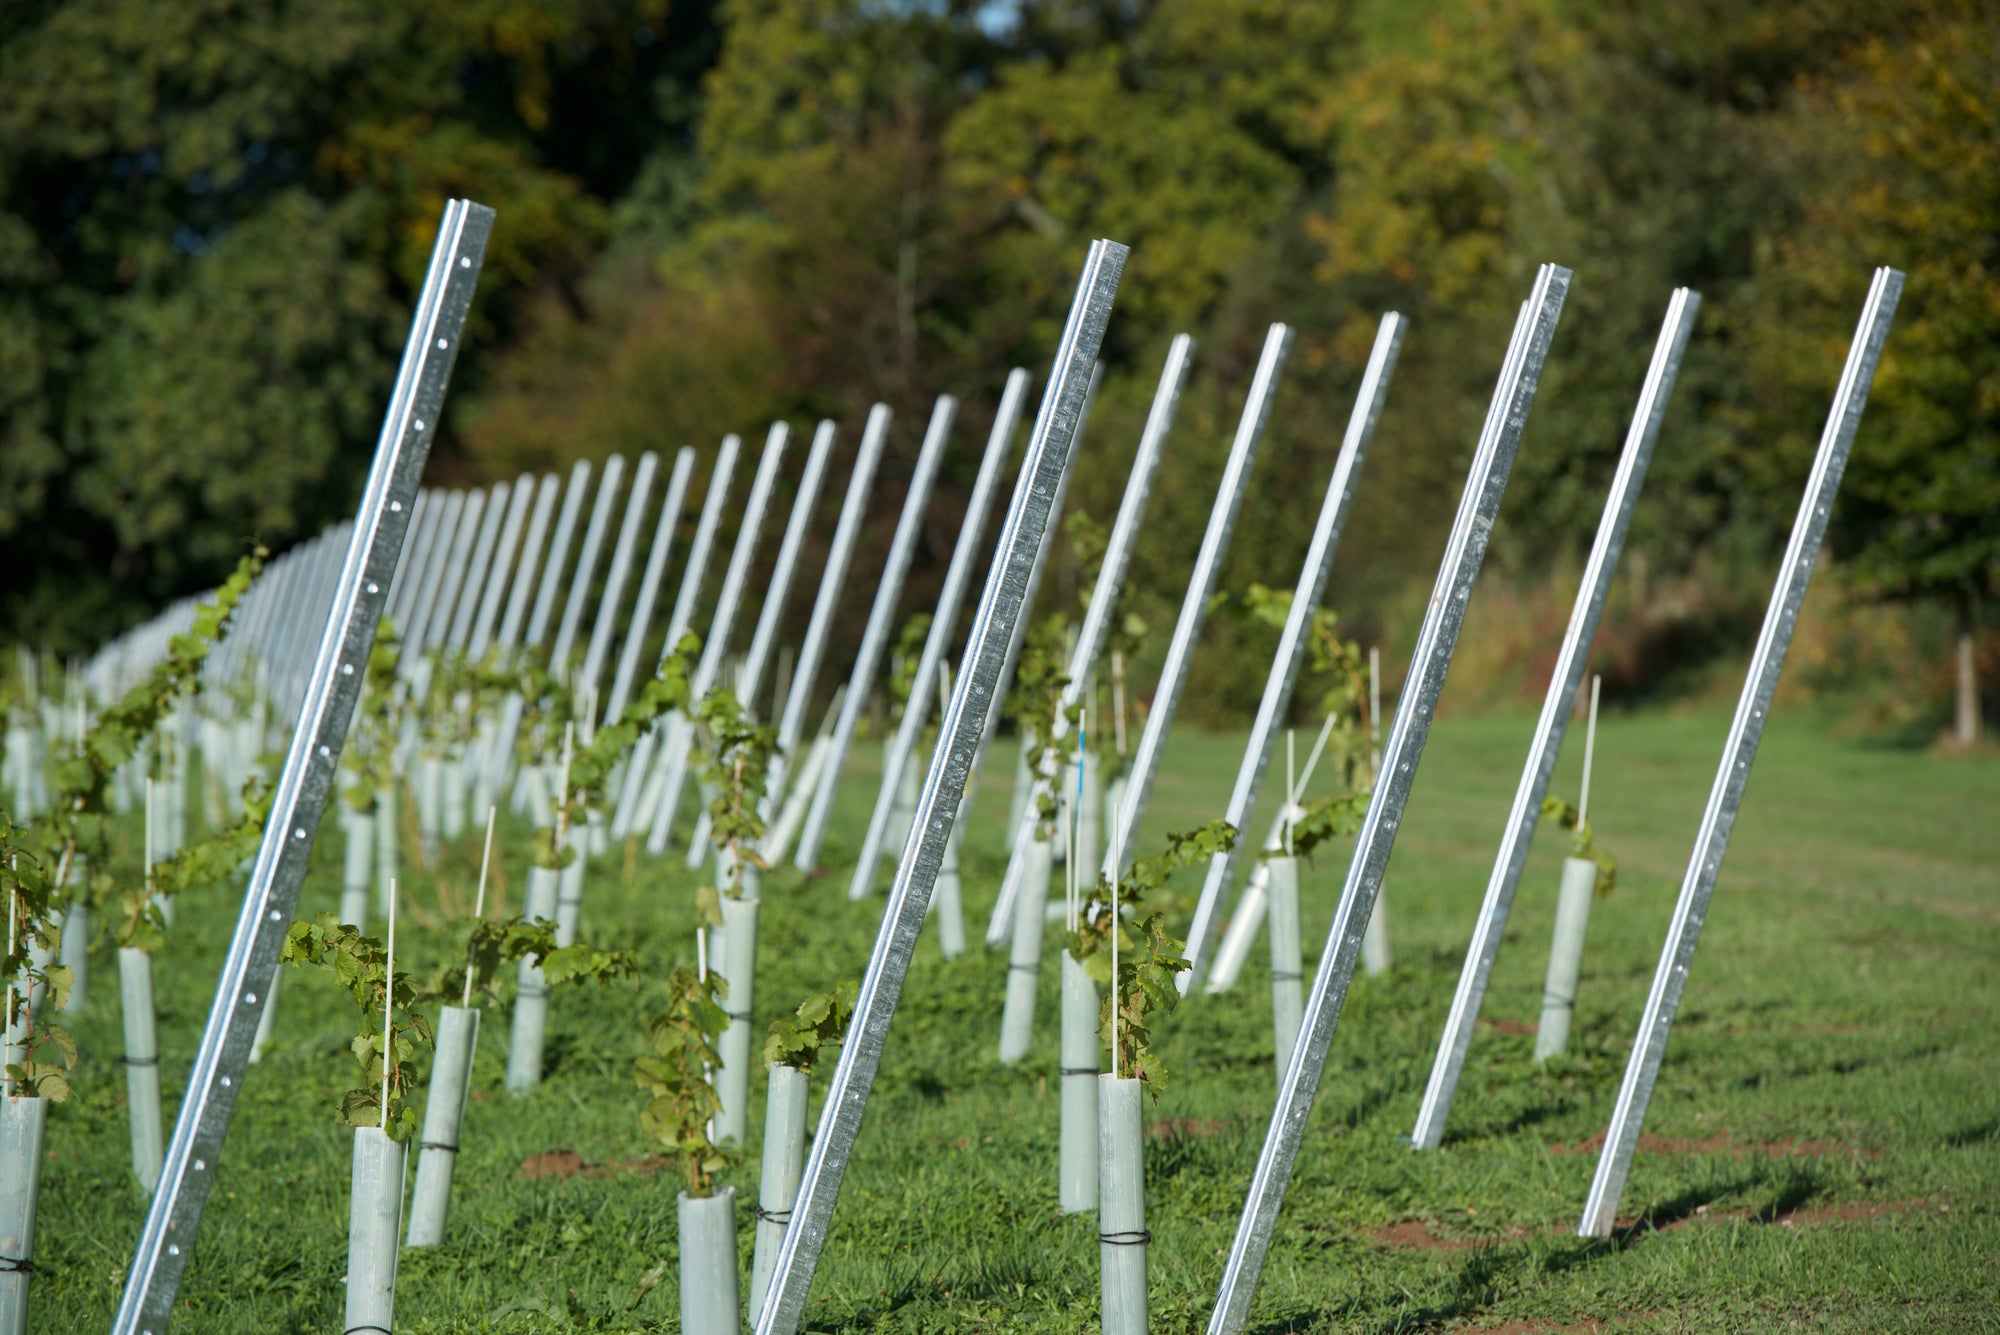 DON'T FENCE ME IN! CHOOSING THE CORRECT TRELLISING MATERIAL FOR YOUR VINEYARD